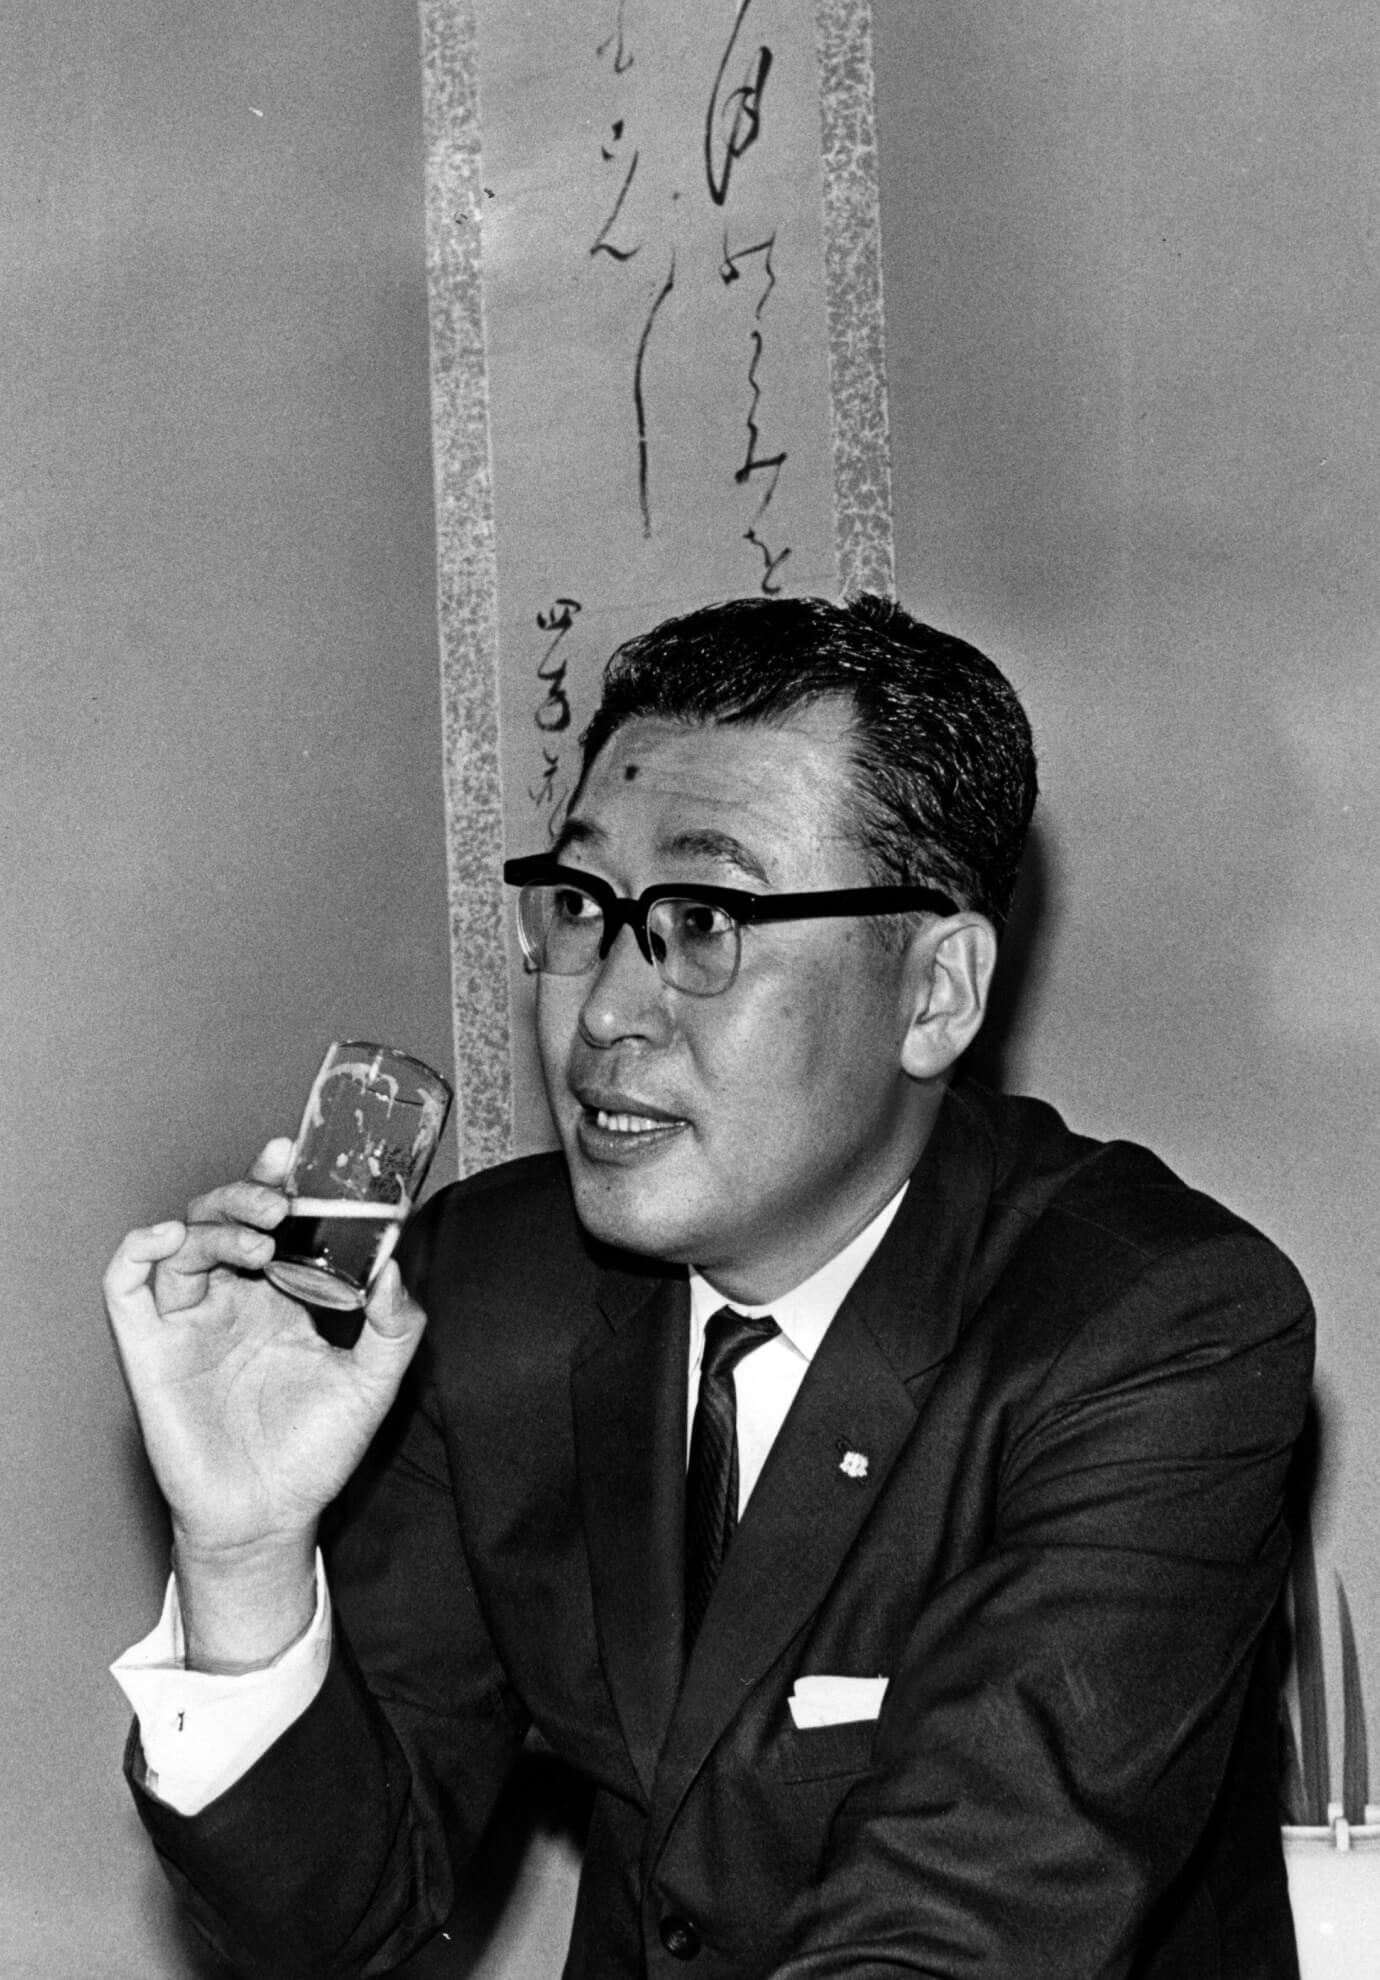  Black-and-white image of Keizo Saji, former Suntory president, with a sample glass of Suntory product